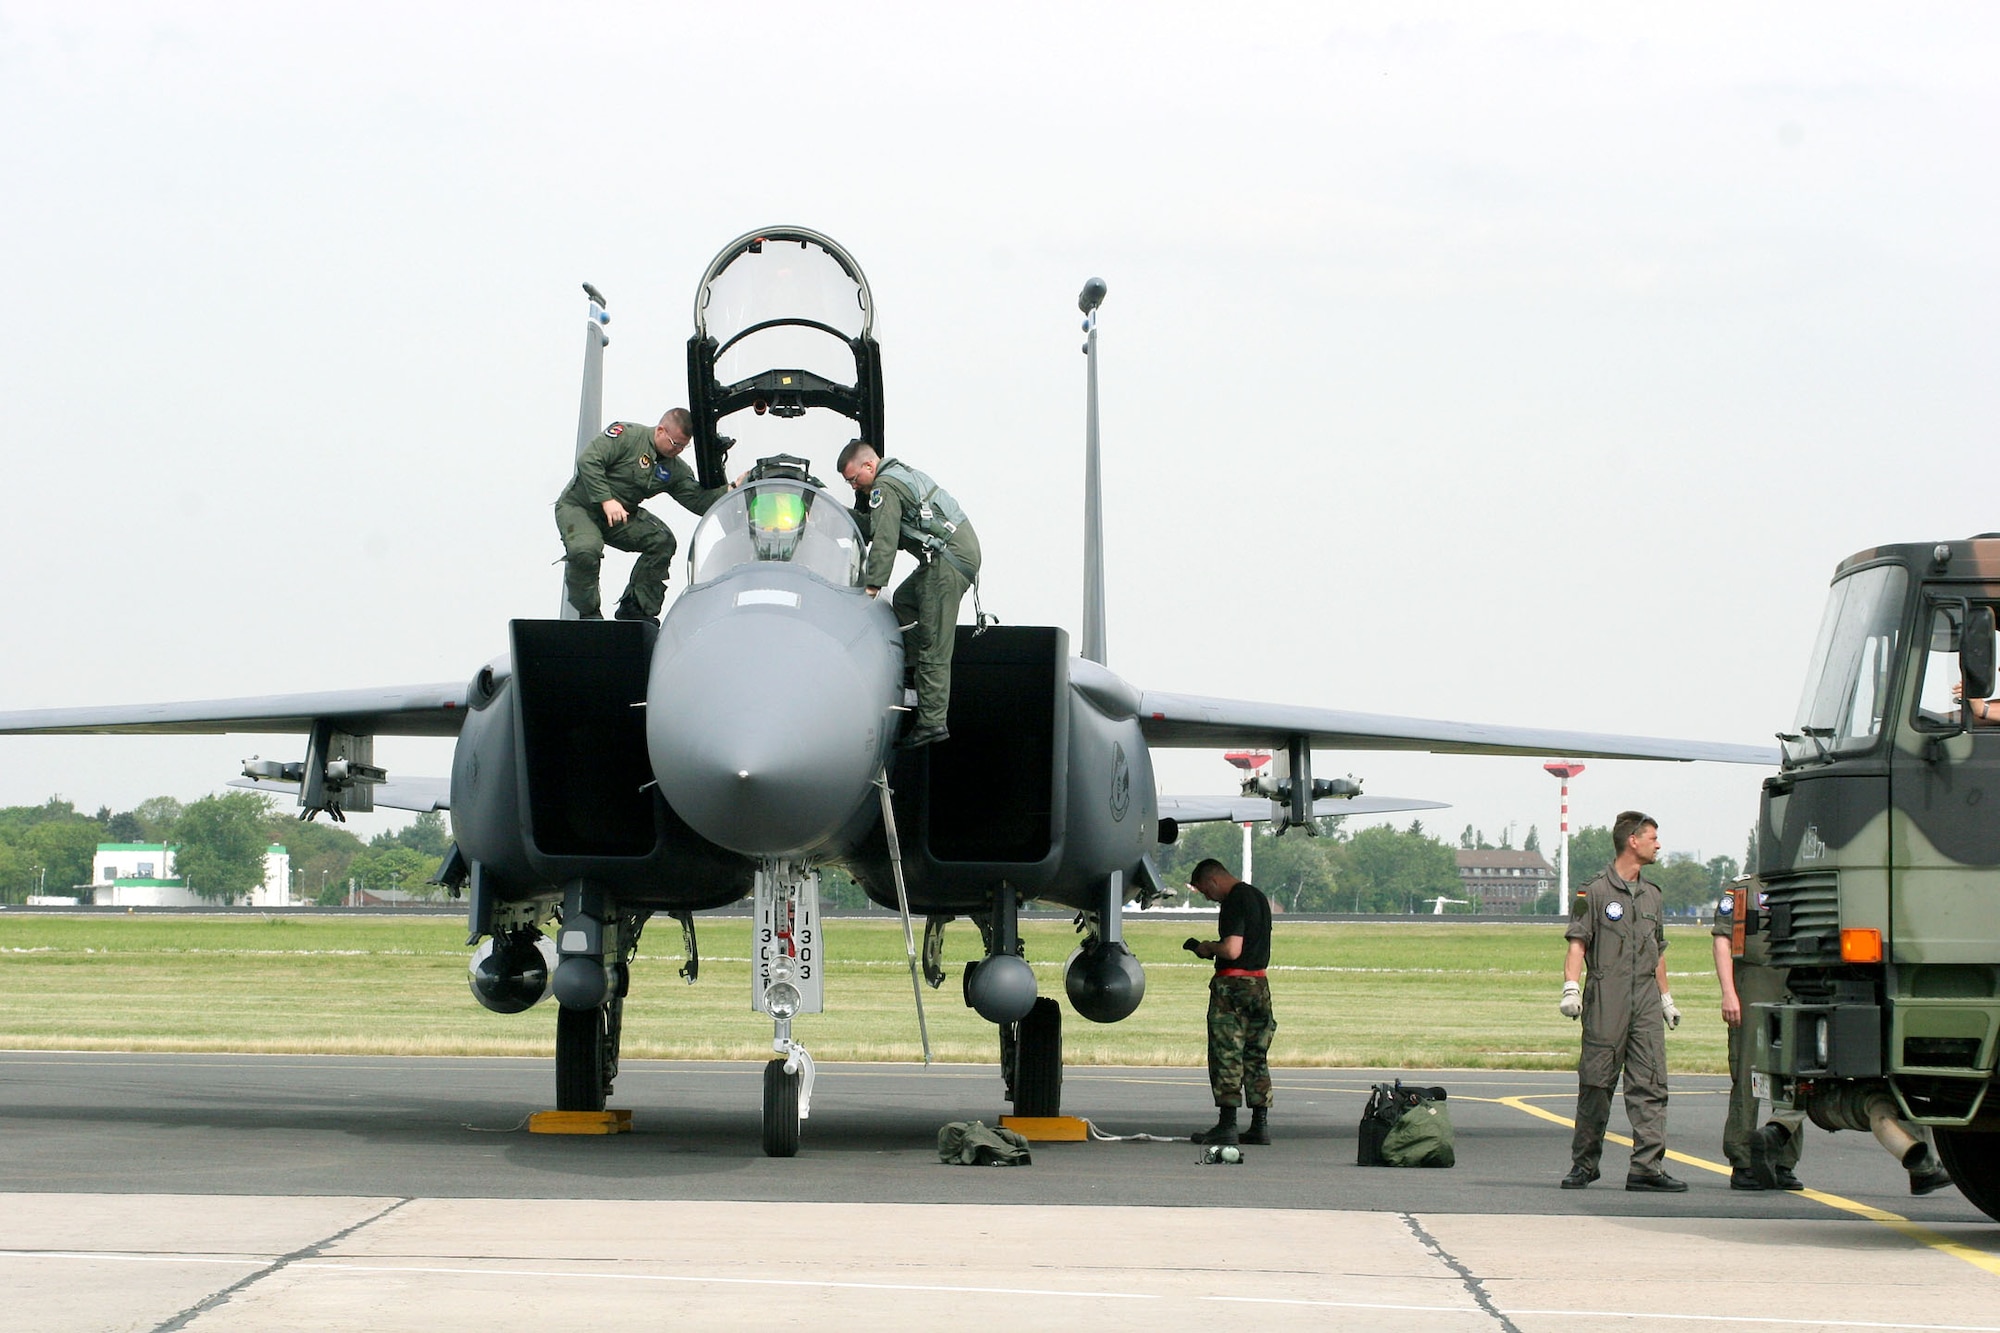 Air Force Capts. D.J. Vollmer (left) and John Beatty exit their F-15E Strike Eagle shortly after arriving at the Berlin Air Show May 15, 2006. Various models of U.S. military aircraft and about 60 support personnel from bases in Europe and the United States are attending the air show at Berlin-Schoenefeld Airport May 16-21. The two captains are pilots with the 493rd Fighter Squadron at Royal Air Force Lakenheath, England.  (U.S. Air Force photo/Maj. Pamela A.Q. Cook)